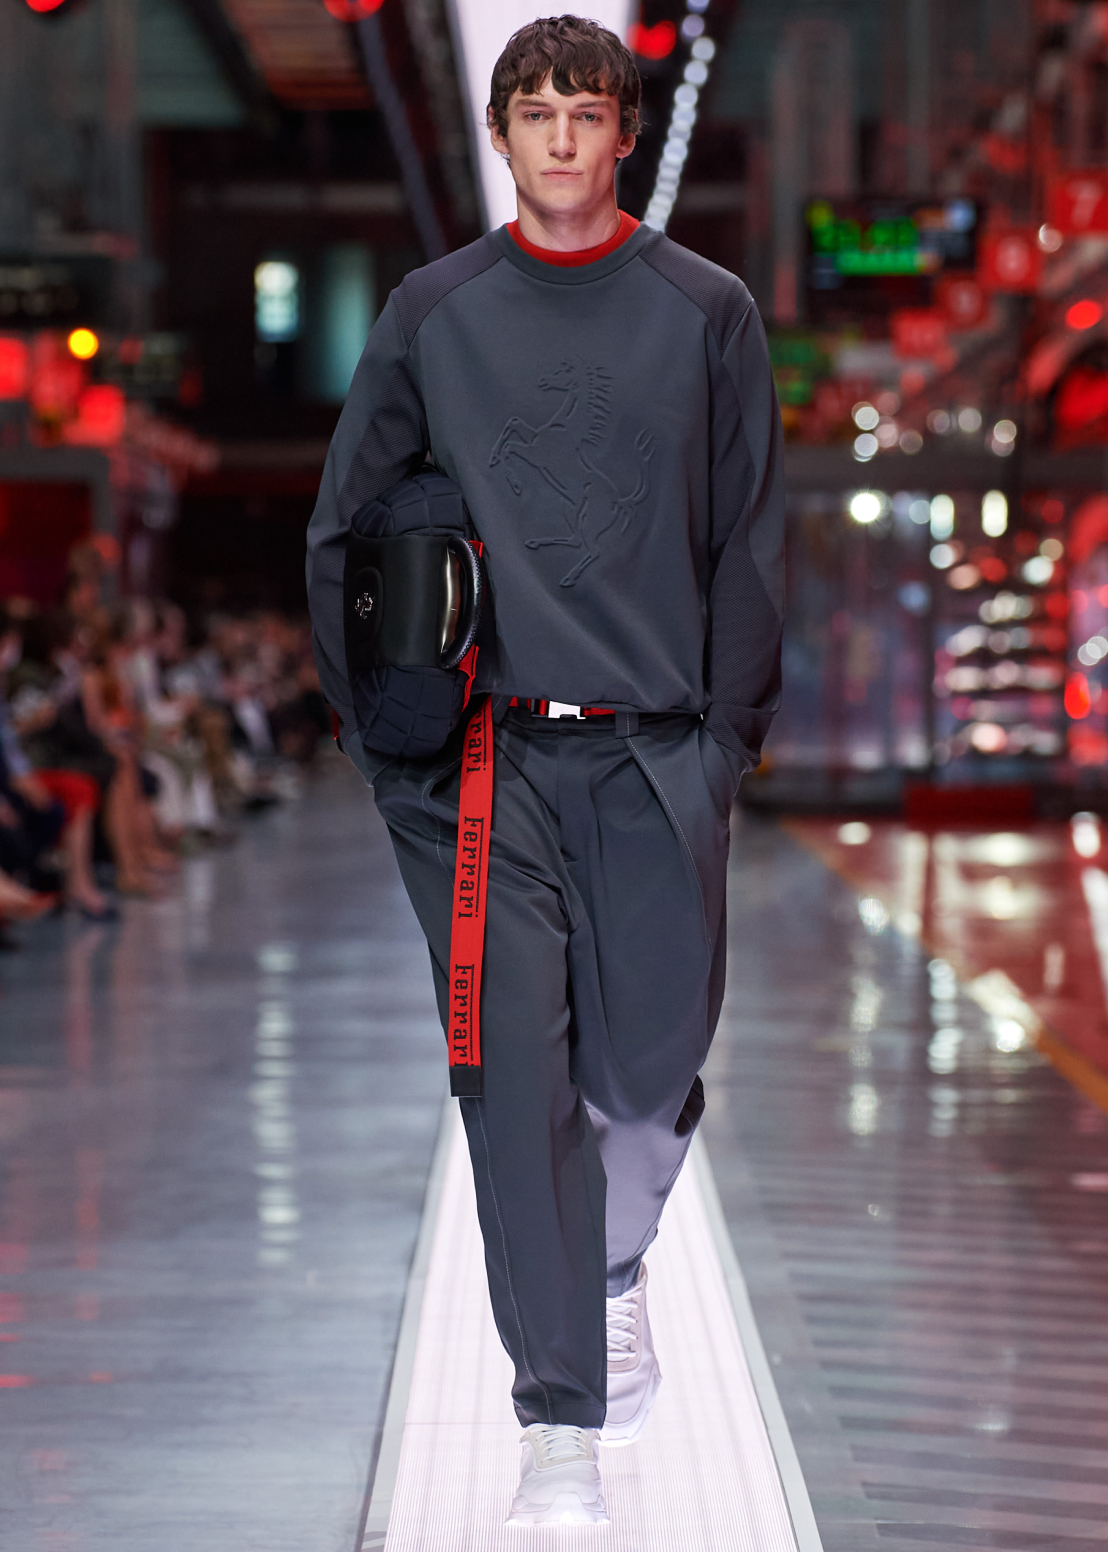 Man on the catwalk wearing top and trousers